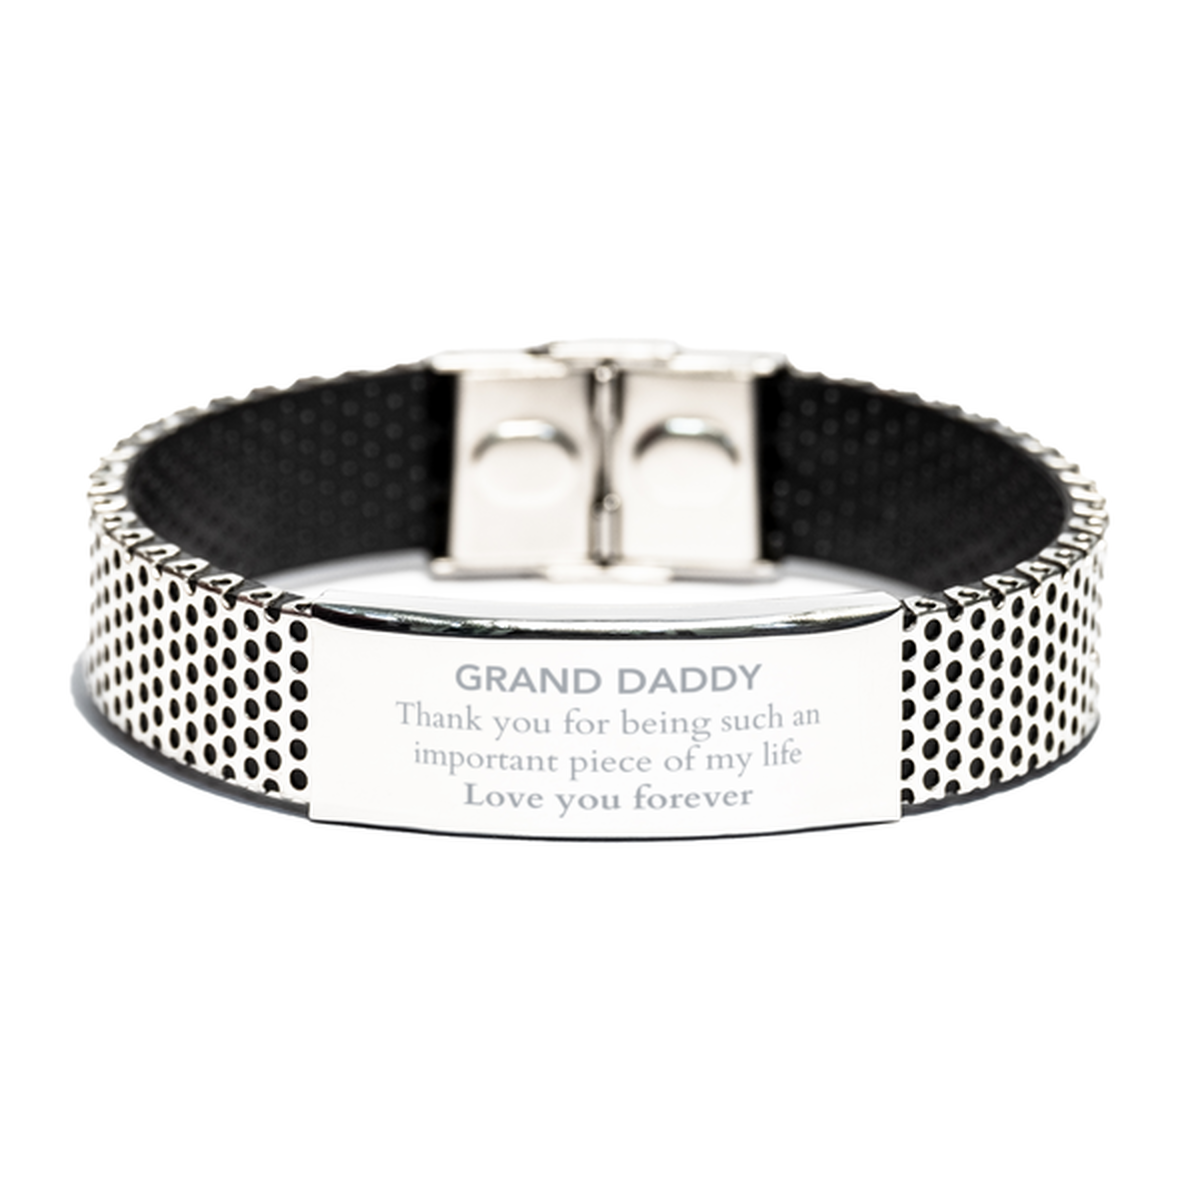 Appropriate Grand Daddy Stainless Steel Bracelet Epic Birthday Gifts for Grand Daddy Thank you for being such an important piece of my life Grand Daddy Christmas Mothers Fathers Day